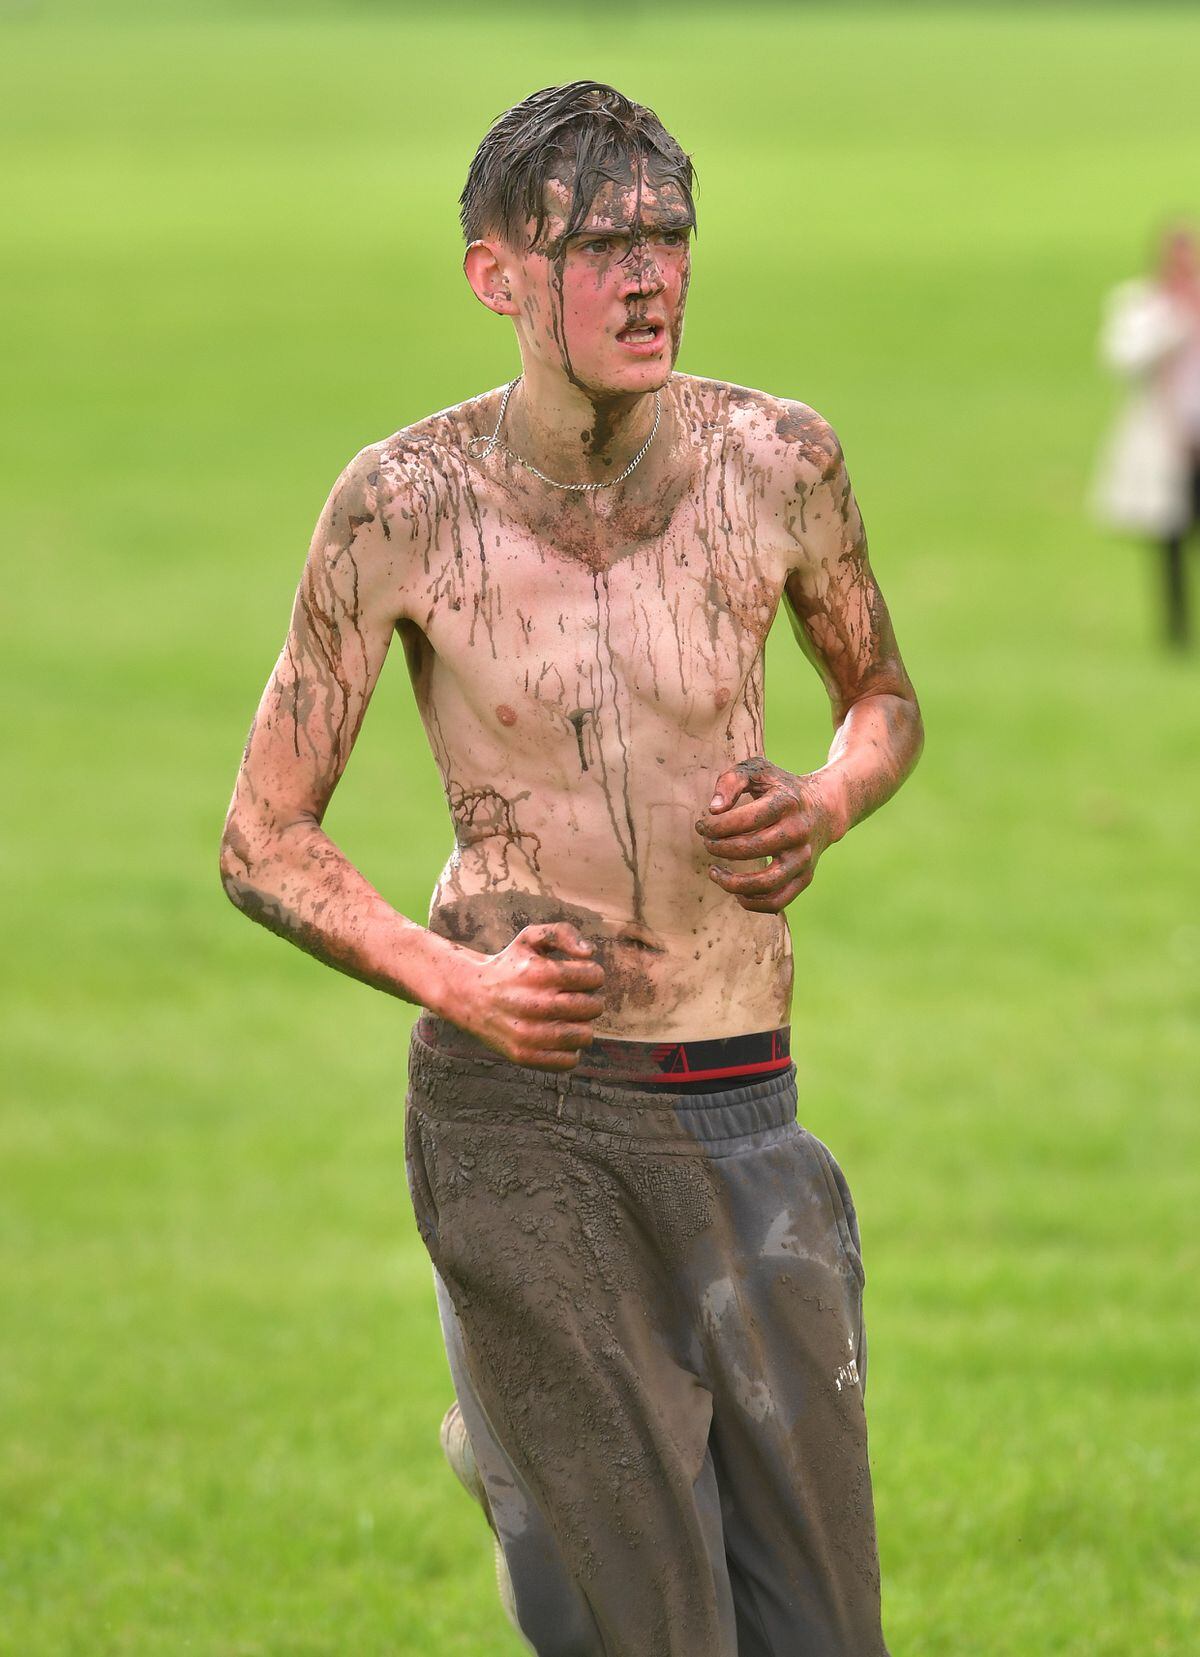 Many of the runners were left covered in mud after the course